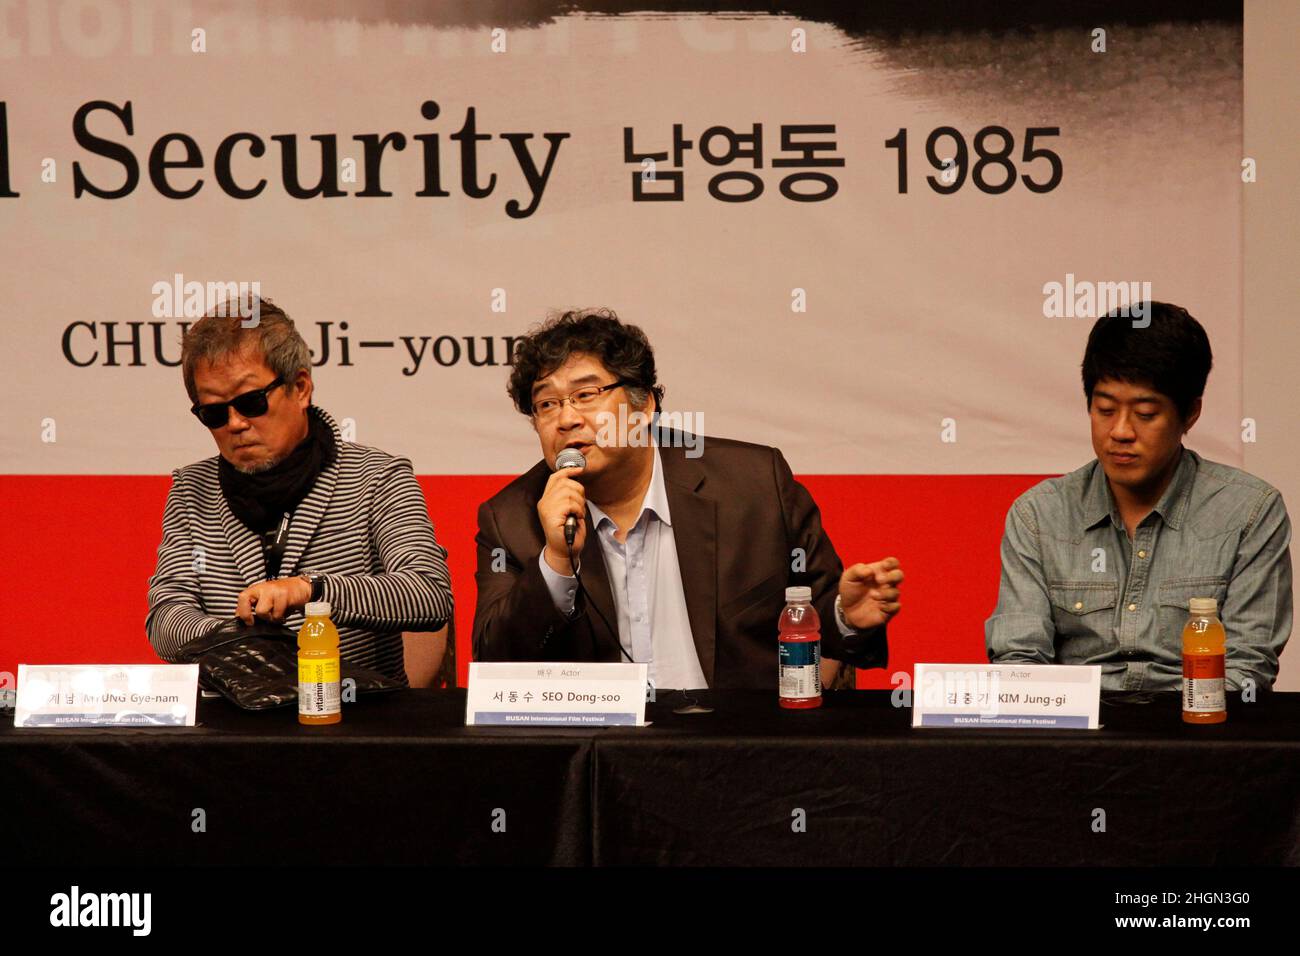 October 6, 2012 - Busan, South Korea : (From lest) Actor Myung Gye Nam, Seo Dong Soo and Kim Jung Gi attend their new film `National Security 1985` Gala Presentation event at the CGV Theater. The film based on the memoir of a democracy activist who was tortured in the 1980s by South Korea's military rulers is provoking discussion about the country's not-so-distant authoritarian past and the influence it will have on this year's presidential election. (Ryu Seung-il / Polaris) Stock Photo